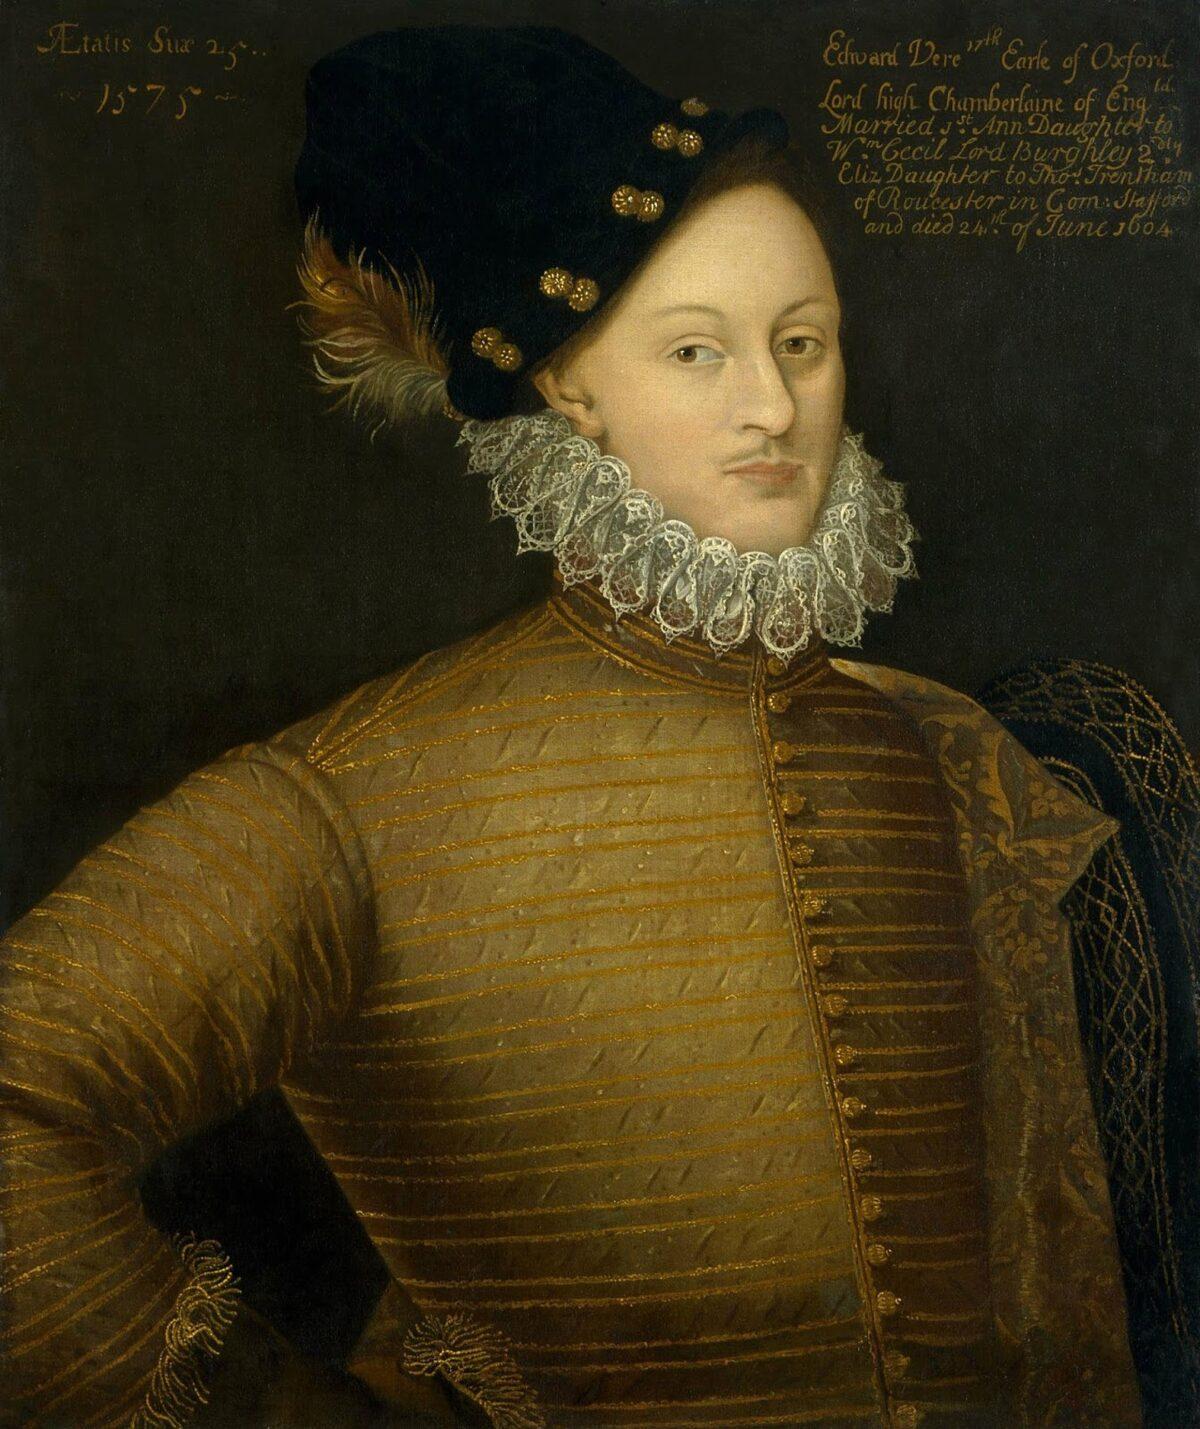 Edward de Vere, the 17th Earl of Oxford, is the most popular alternative candidate for the alleged author of Shakespeare’s works. Unknown artist after lost original, 1575. The National Portrait Gallery, London. (Public Domain)